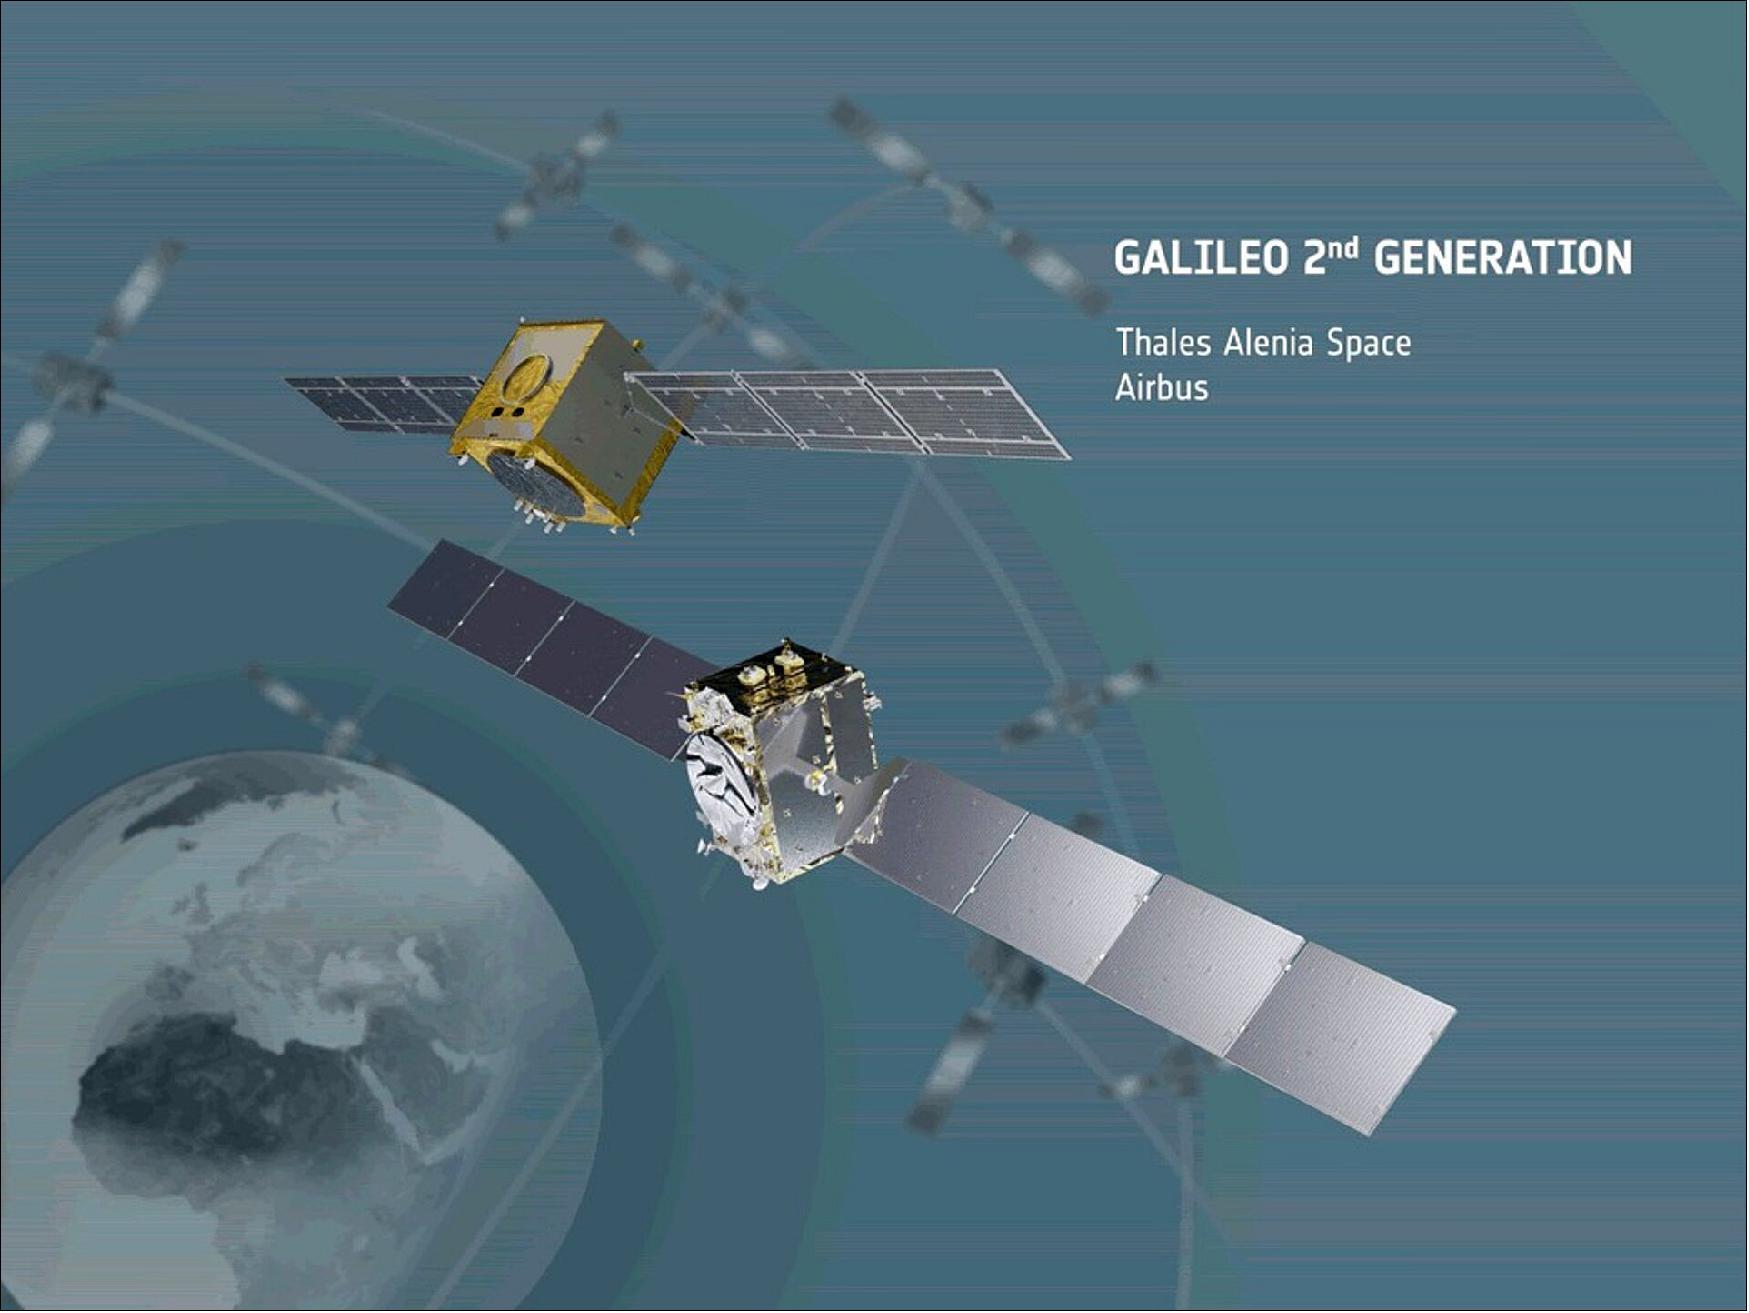 Figure 14: These Galileo Second Generation (G2) satellites will revolutionise the Galileo fleet, joining the 26 first generation Galileo satellites in orbit today plus the 12 ‘Batch 3’ satellites currently in production and testing, with a first launch later this year (image credit: ESA)